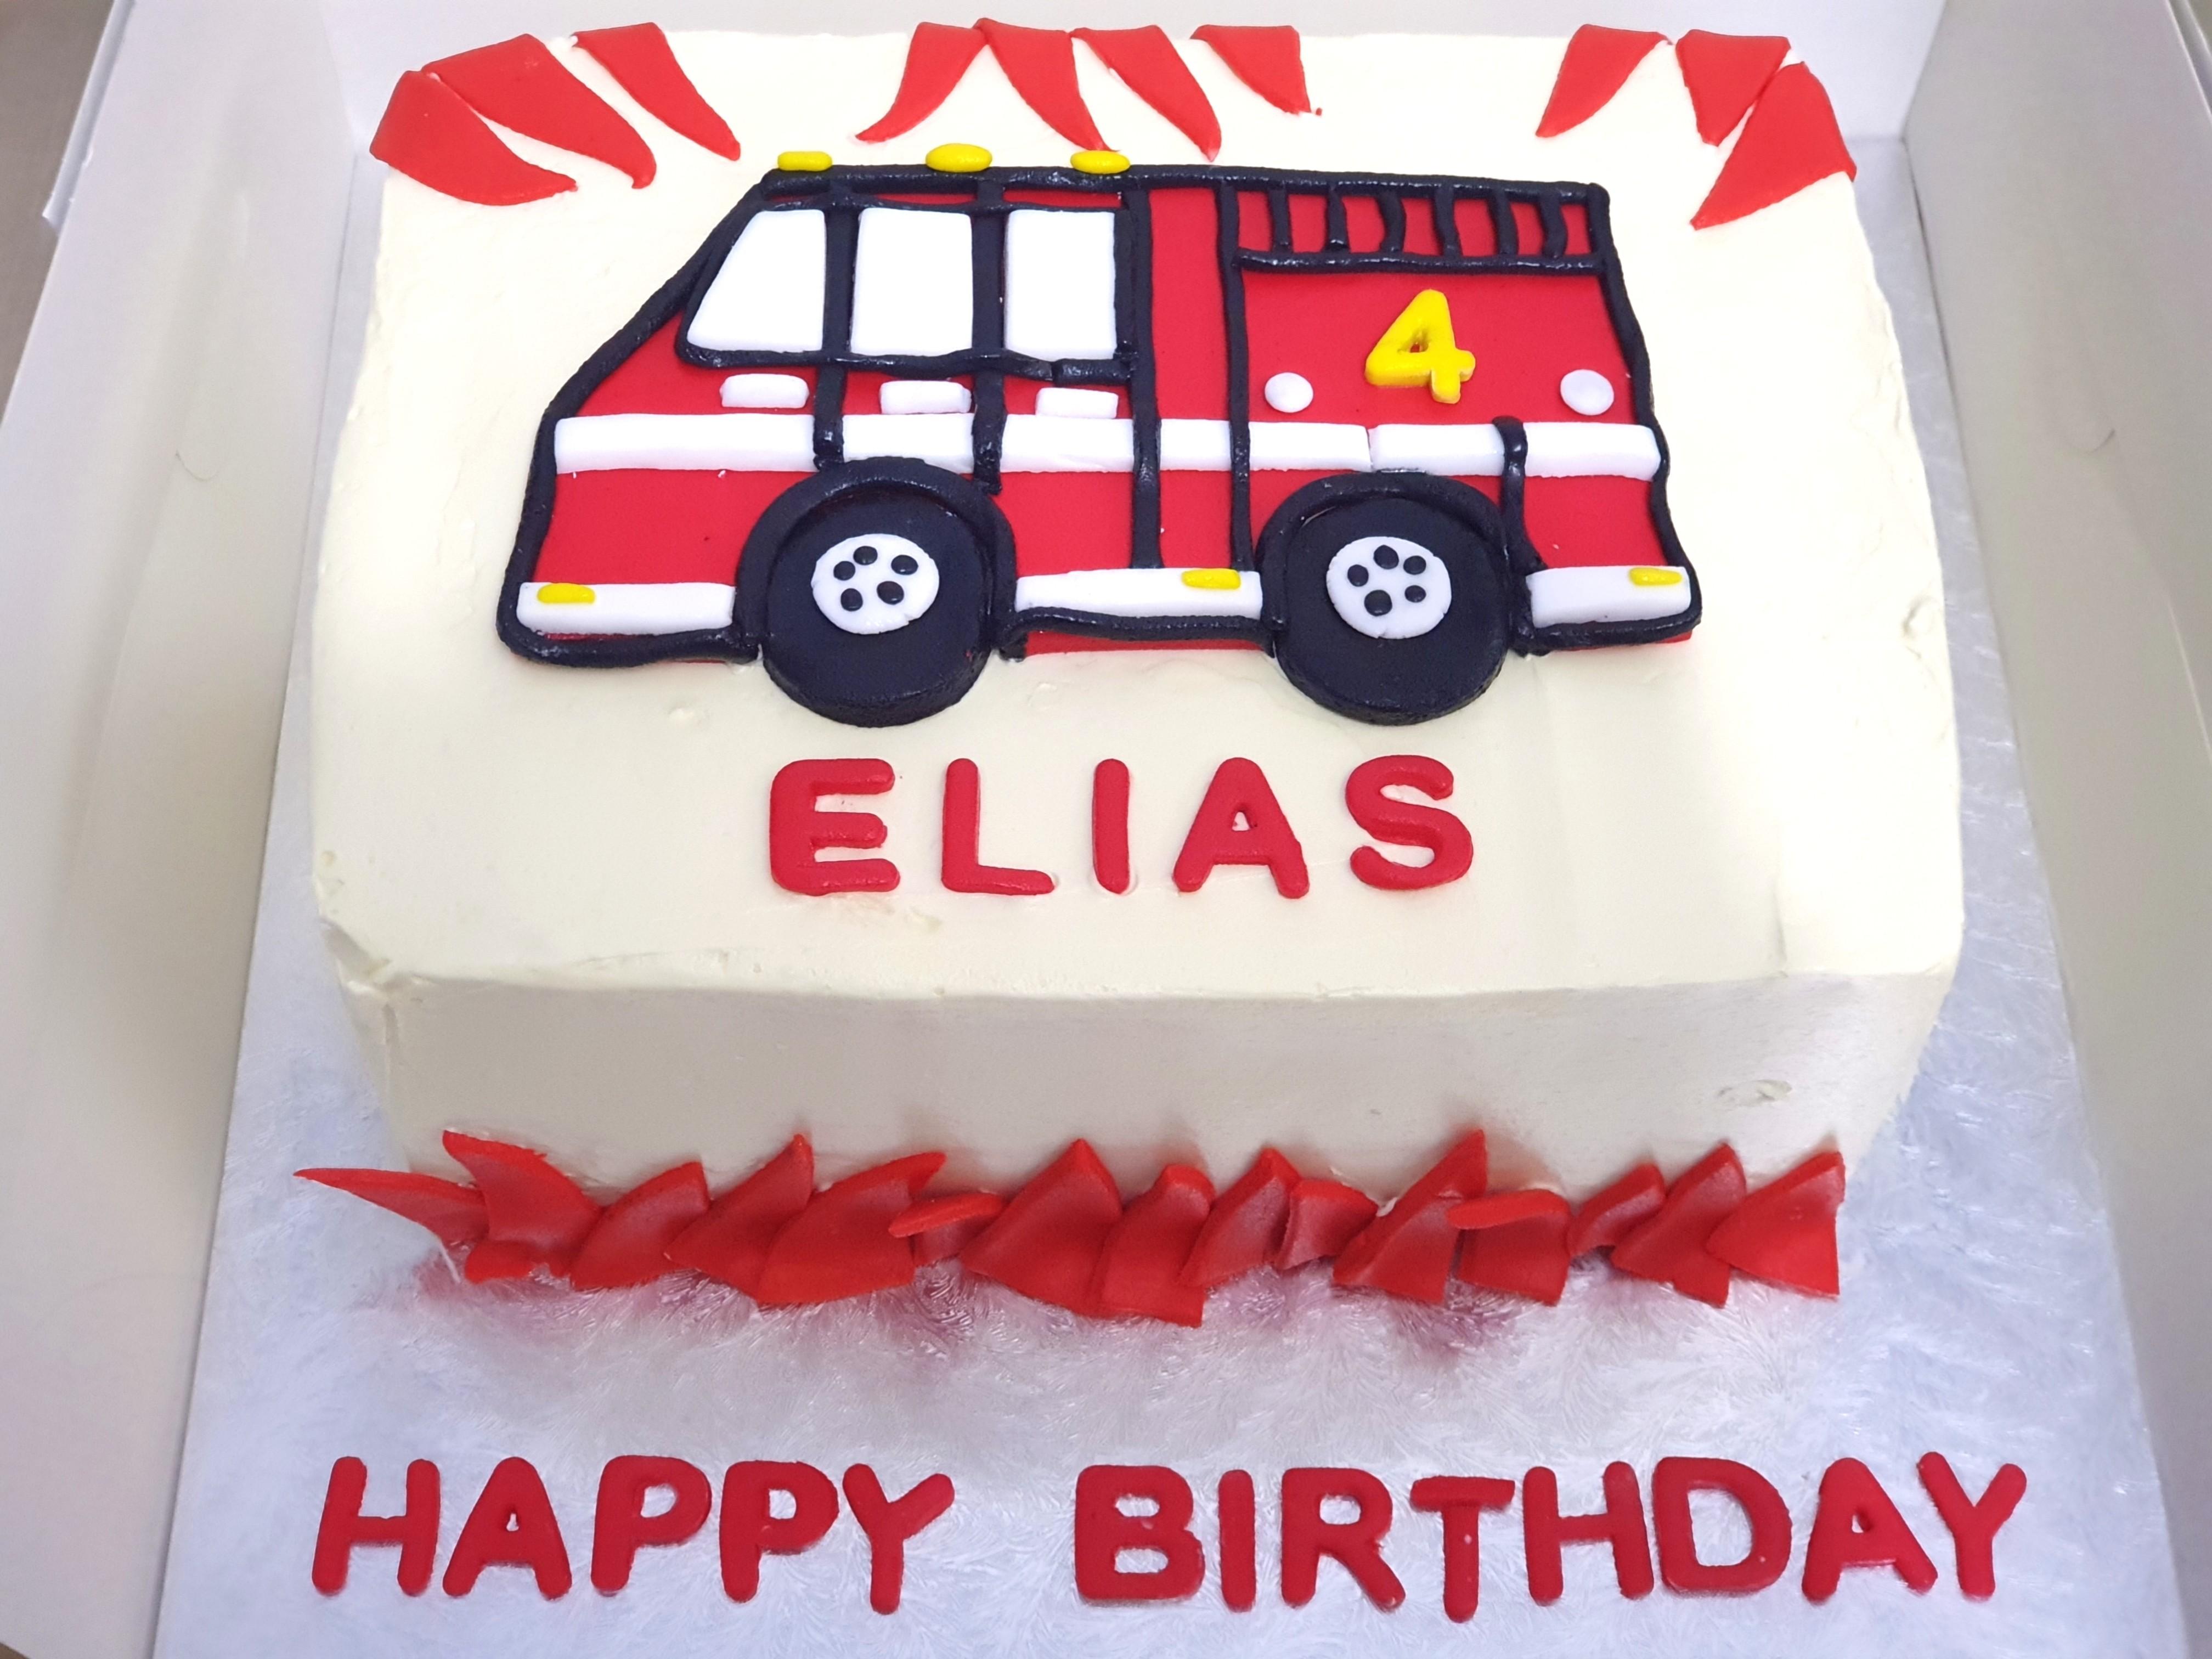 DIY Firetruck Cake that is so easy! Cute kits and simple steps from Cakest!  | Firetruck cake, Fireman birthday, Truck cakes